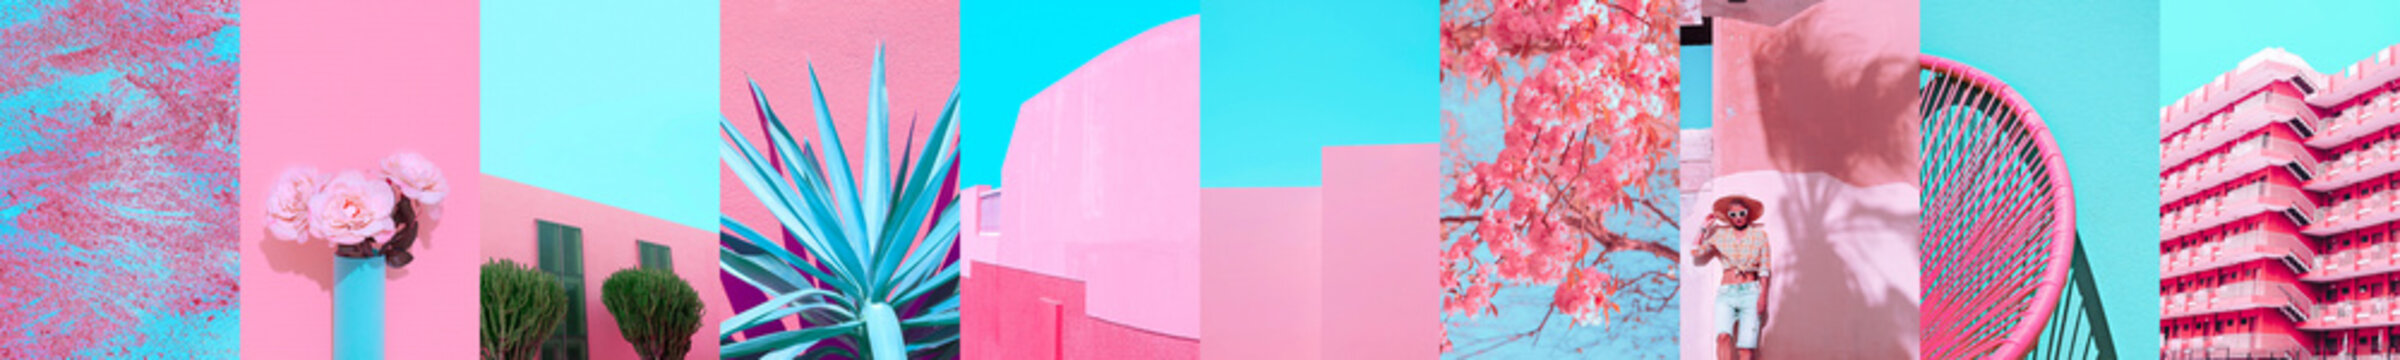 Set of trendy aesthetic photo collages. Minimalistic images of top colors. Pink and blue moodboard